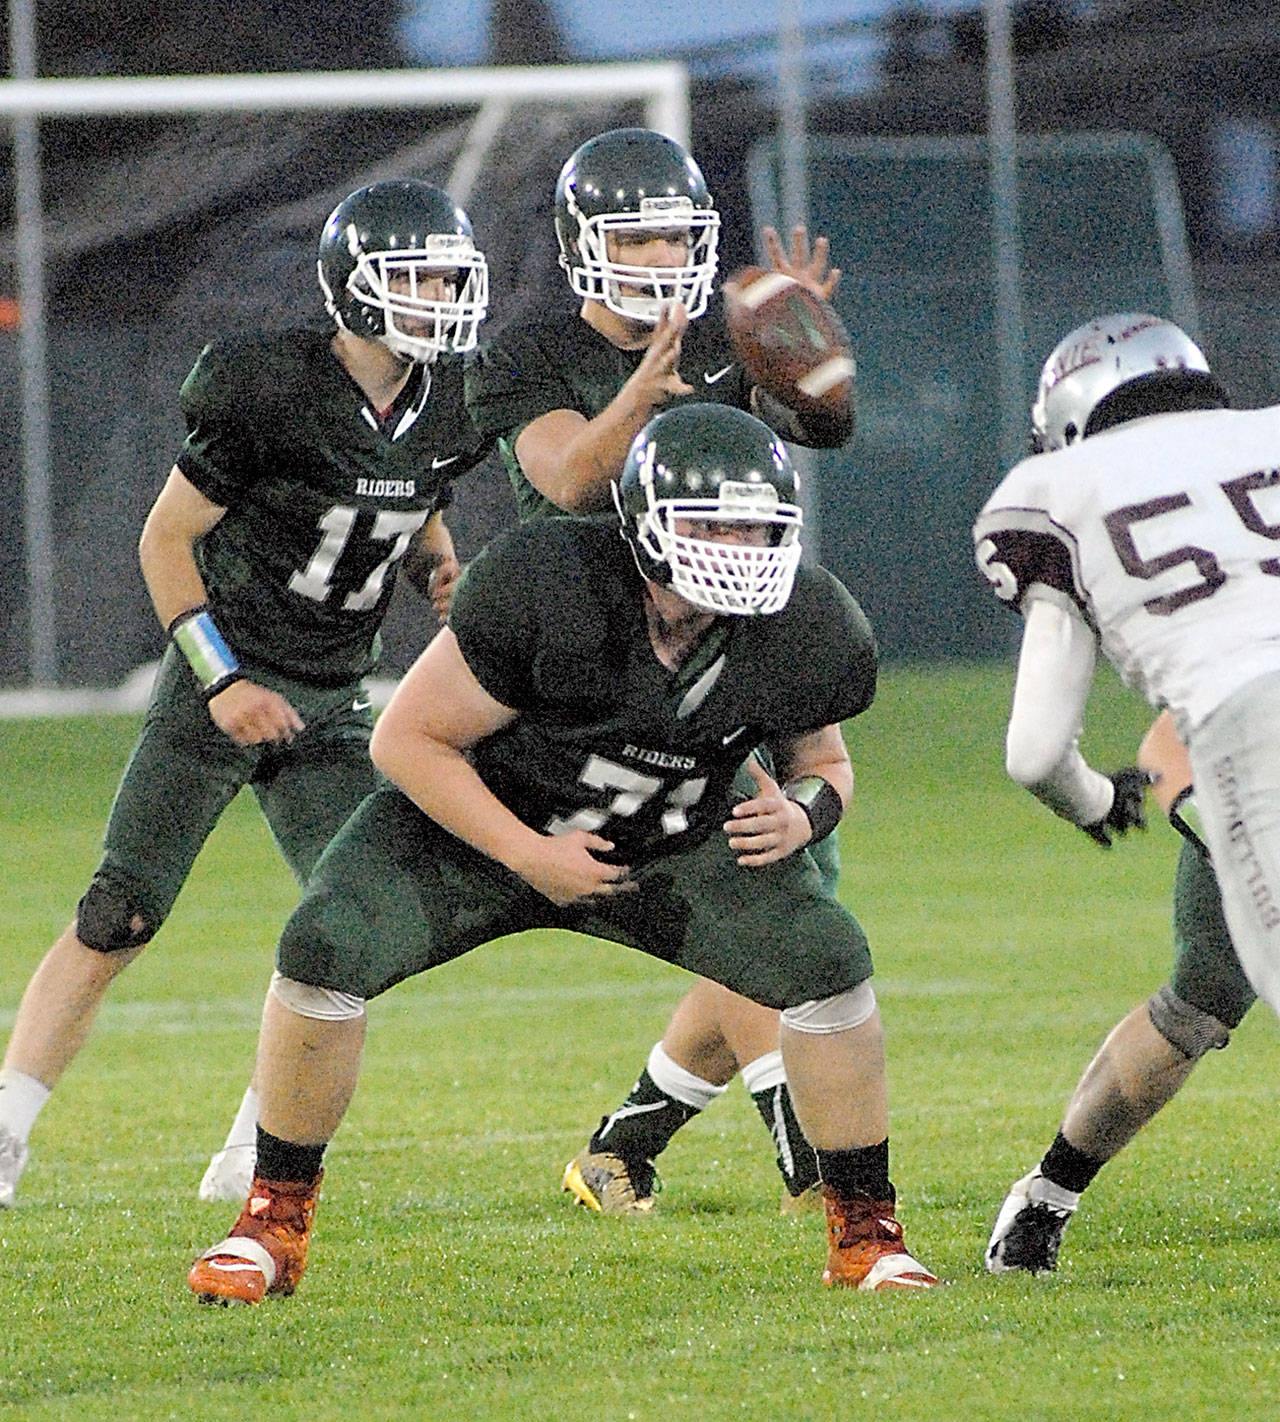 Keith Thorpe/Peninsula Daily News Port Angeles quarterback Brenden Roloson-Hines, back, receives the snap surrounded by teammates Garrett Edwards, left, and Cole Walsh as Montesano’s Kai Olson closes in during last Friday’s game at Port Angeles Civic Field.